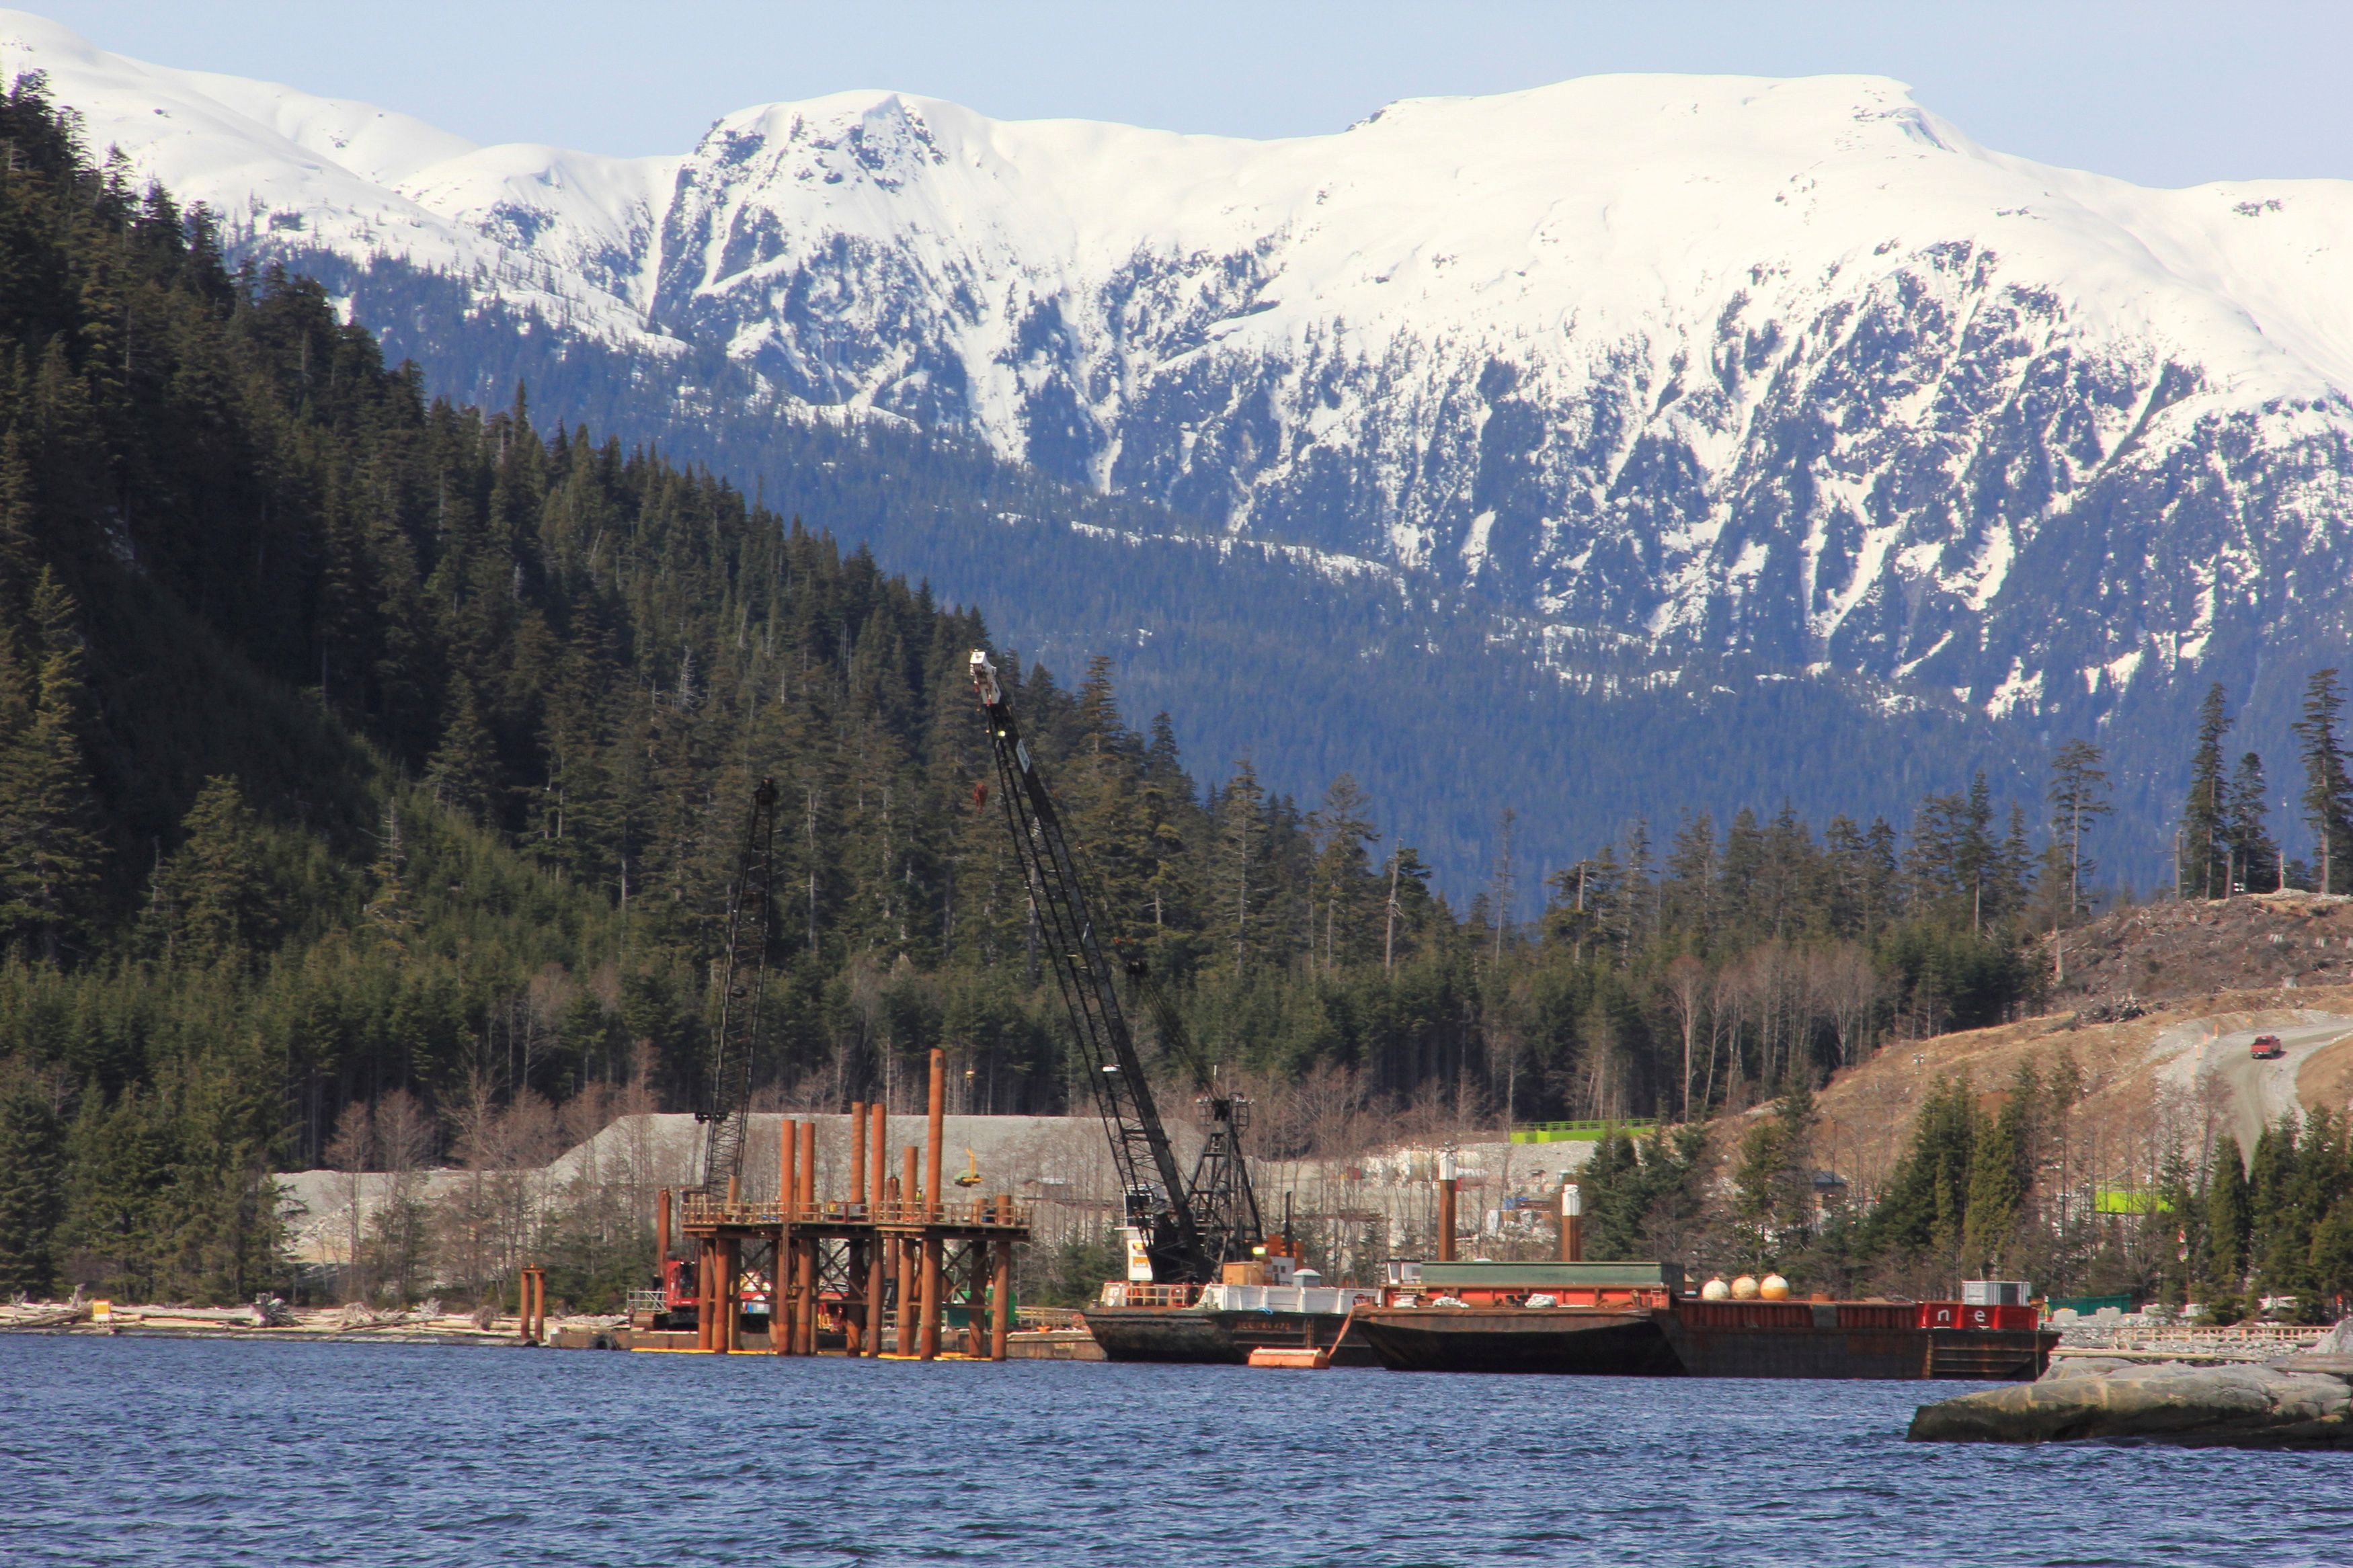 Cranes work in the water at the Kitimat LNG site near Kitimat, in northwestern British Columbia on April 13, 2014. REUTERS/Julie Gordon/File Photo